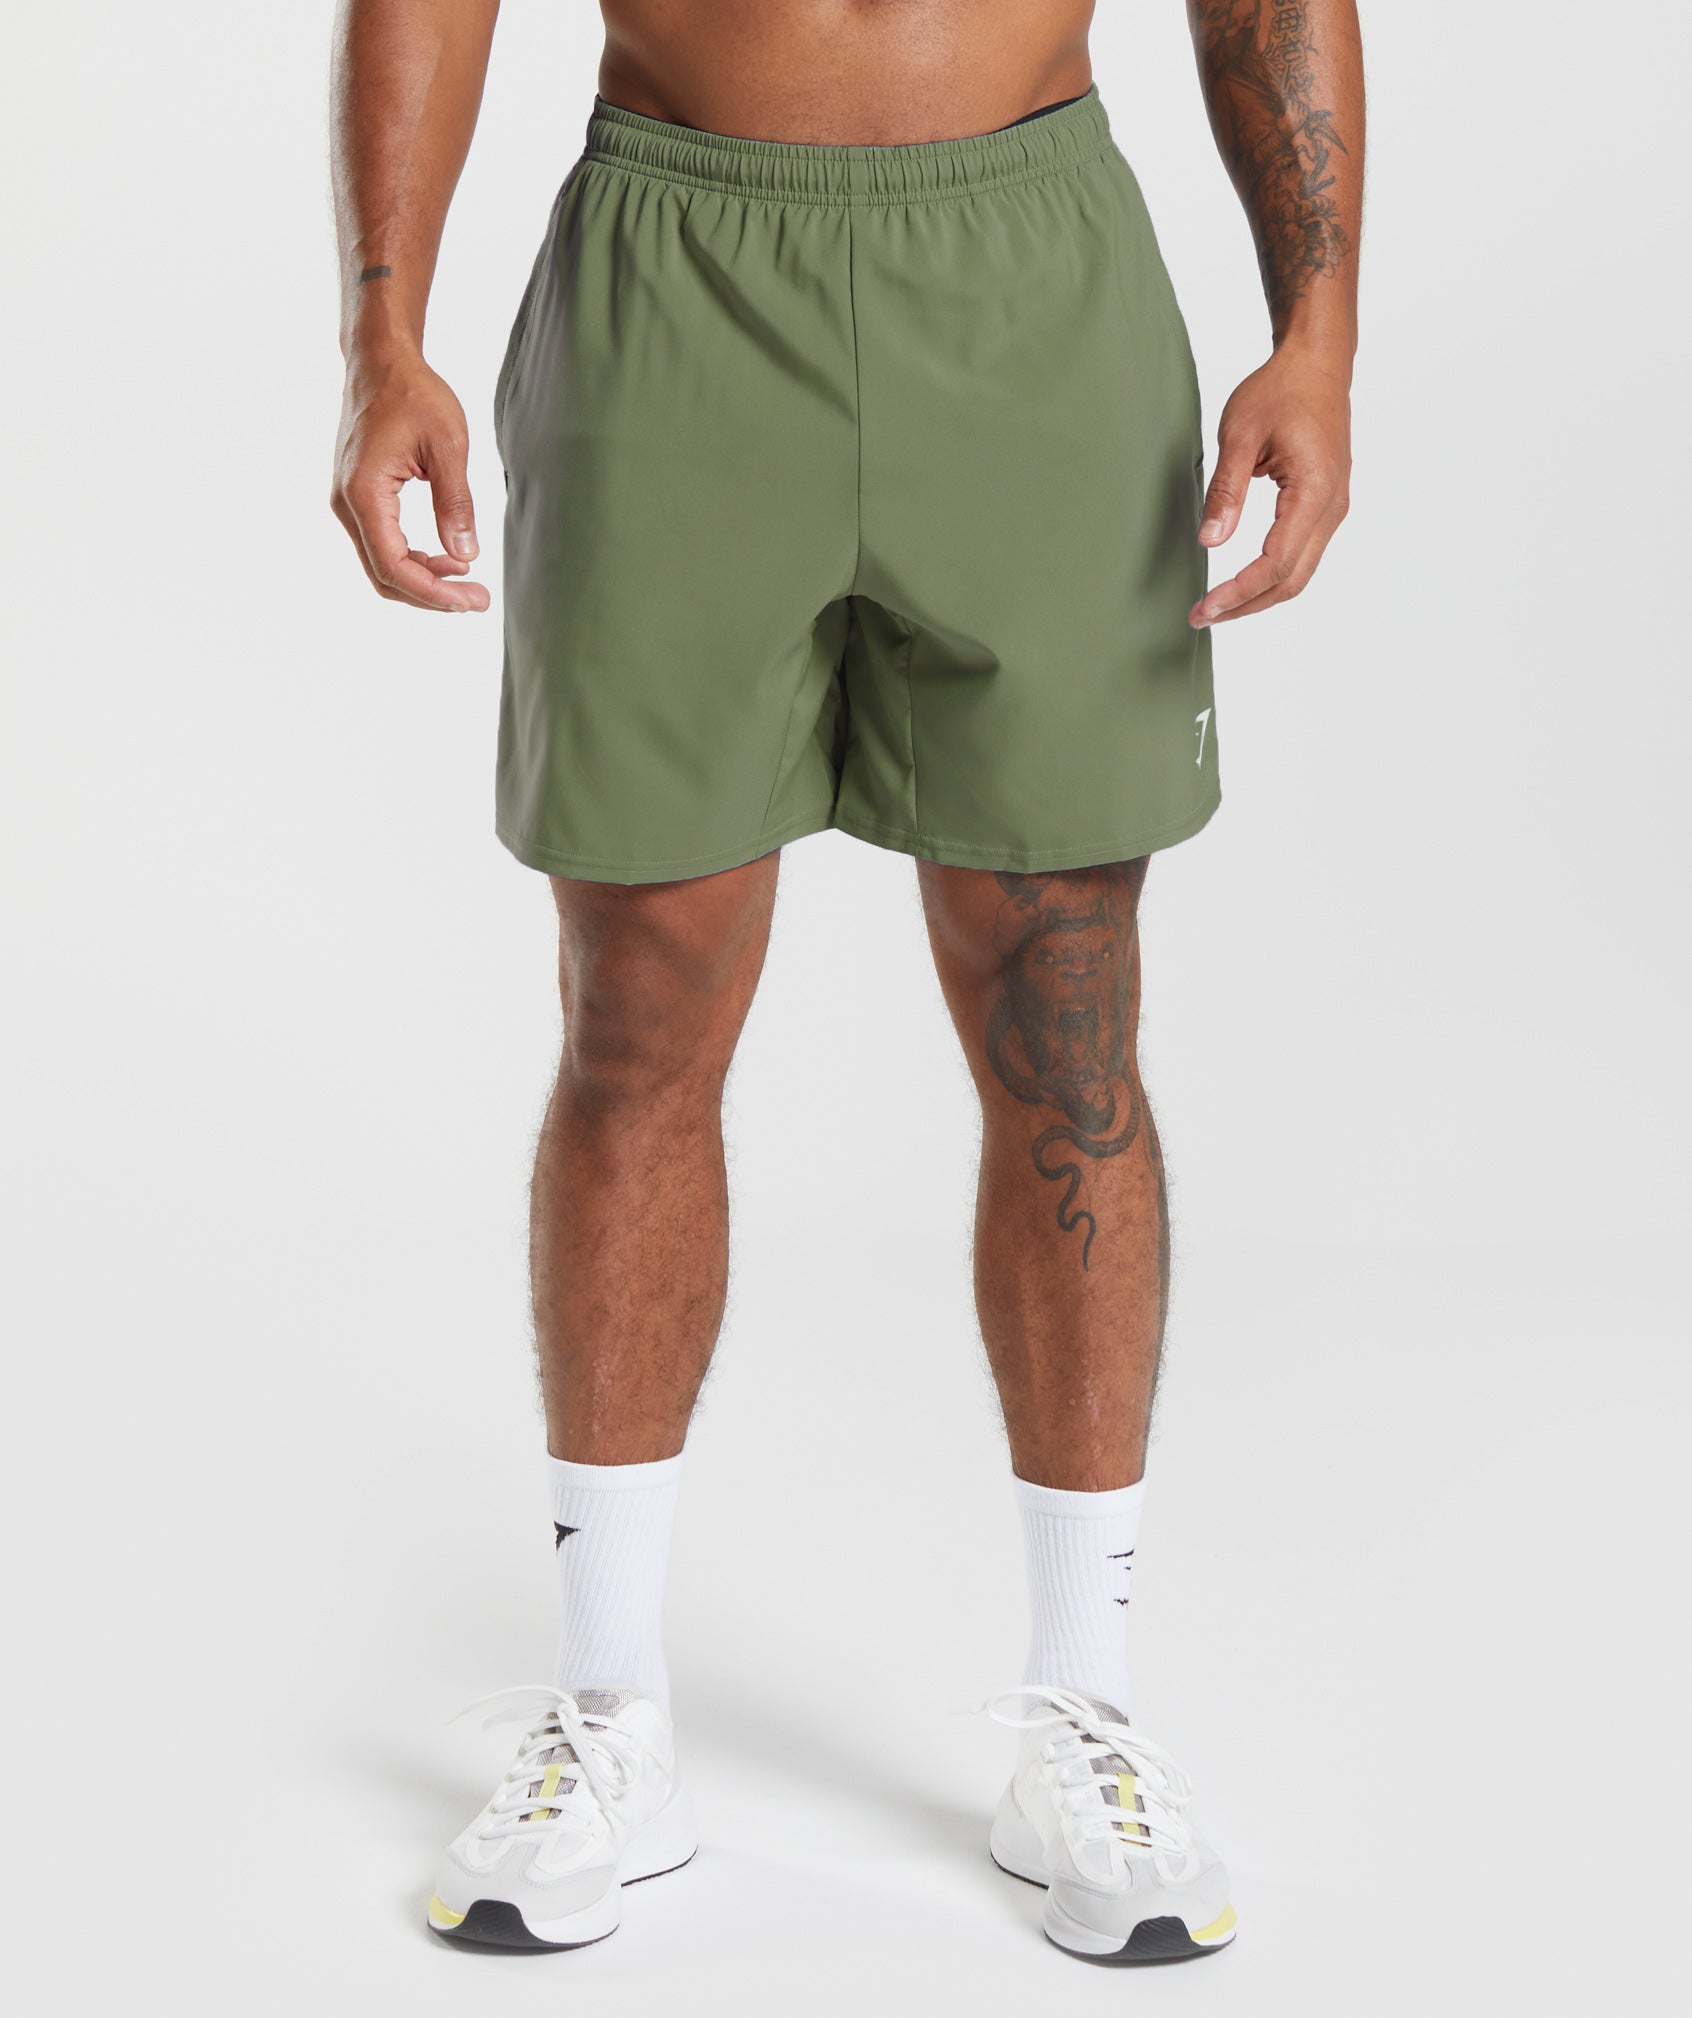 Arrival 7" Shorts in Core Olive is out of stock